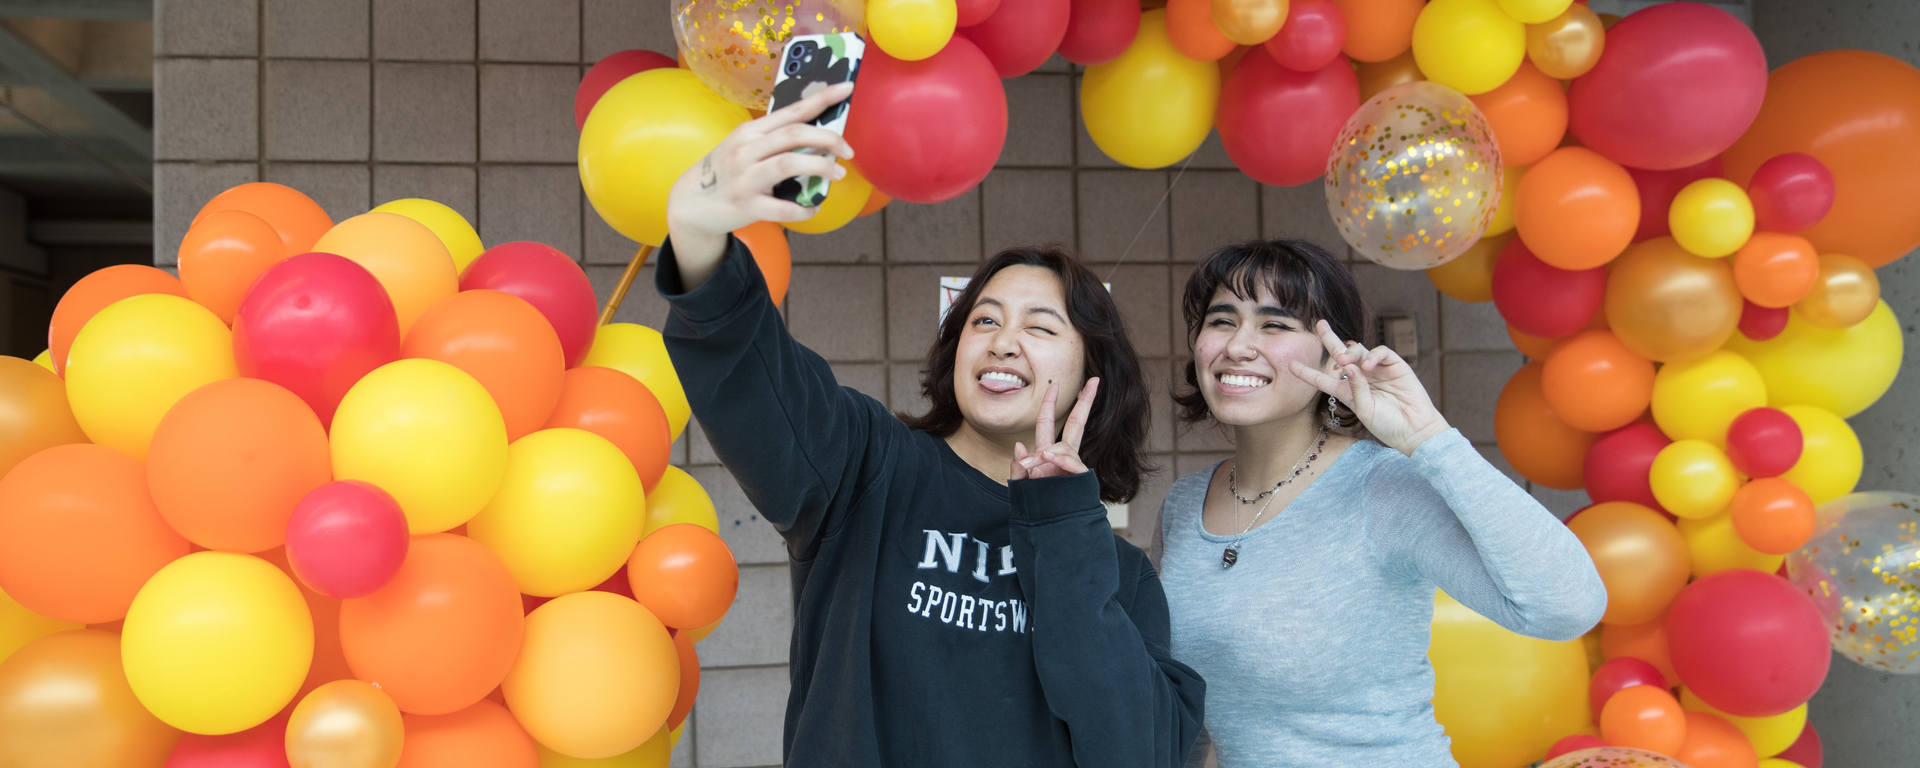 students taking a selfie in front of a balloon arch